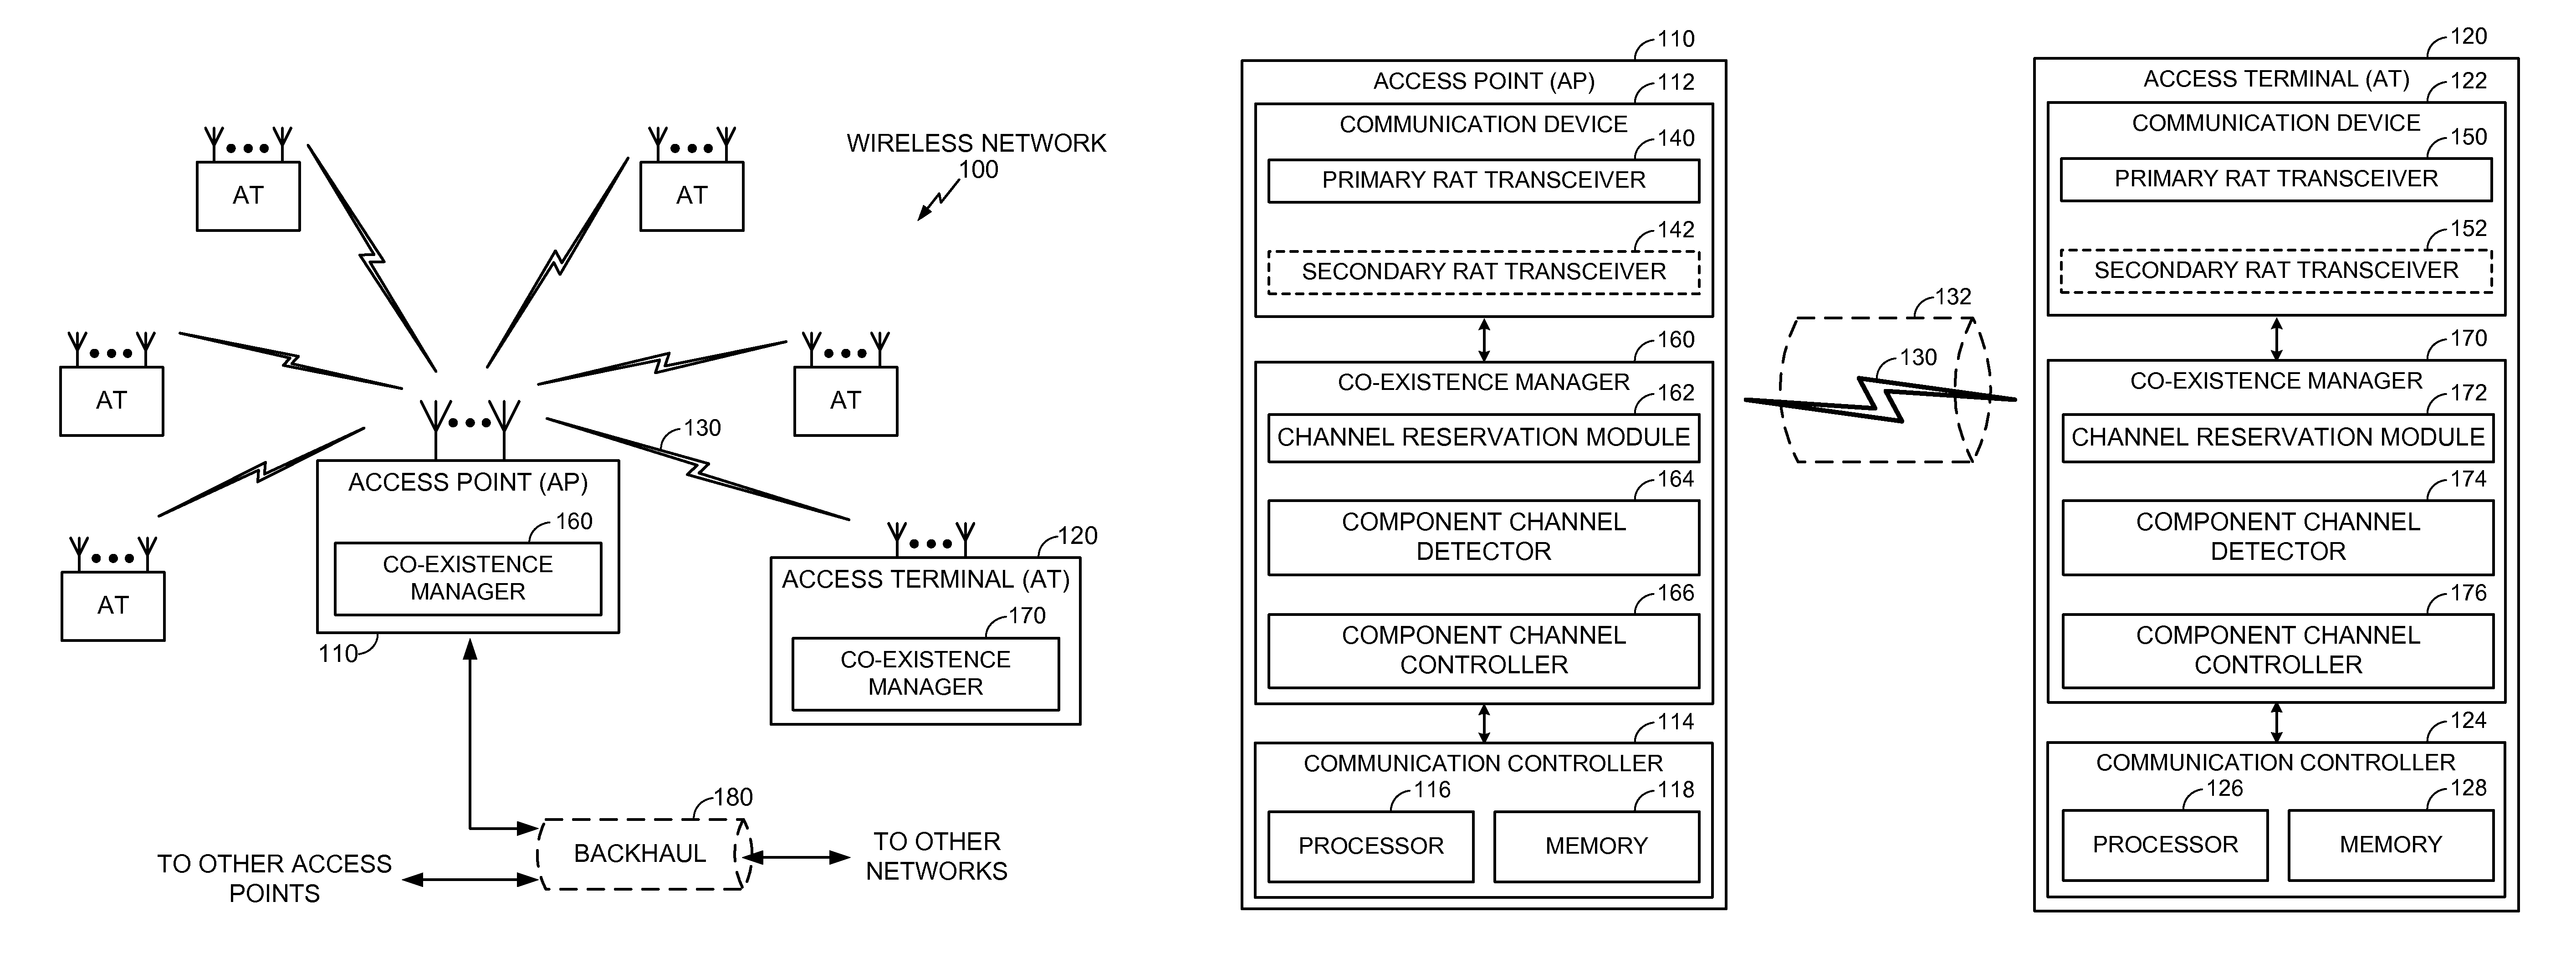 Partial channel reservation on a shared communication medium